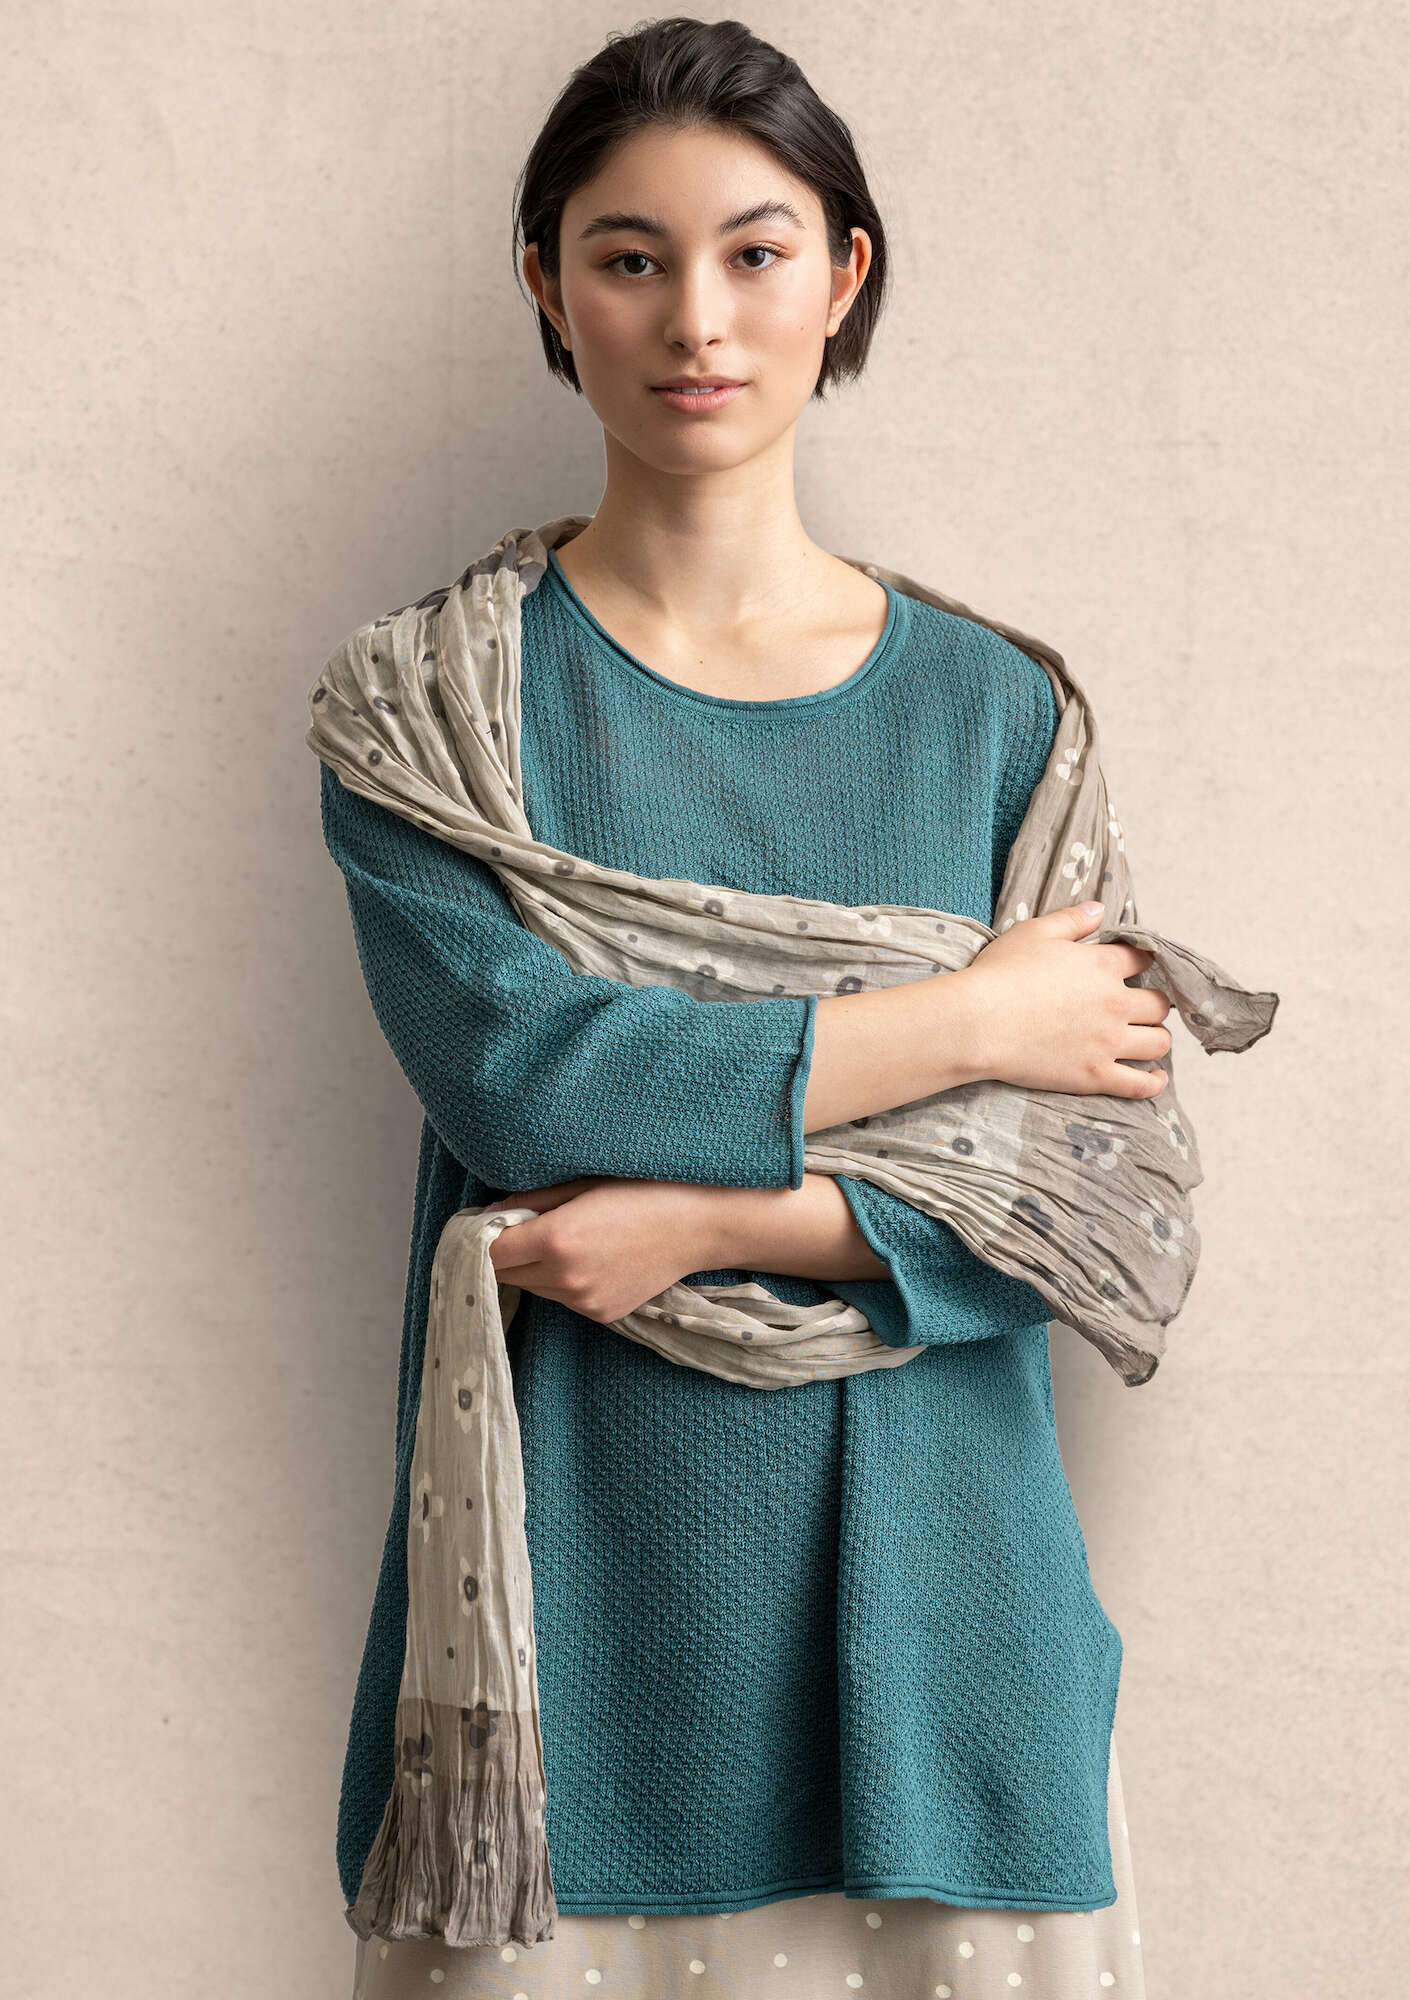 Tunic in a recycled linen knit fabric verona green